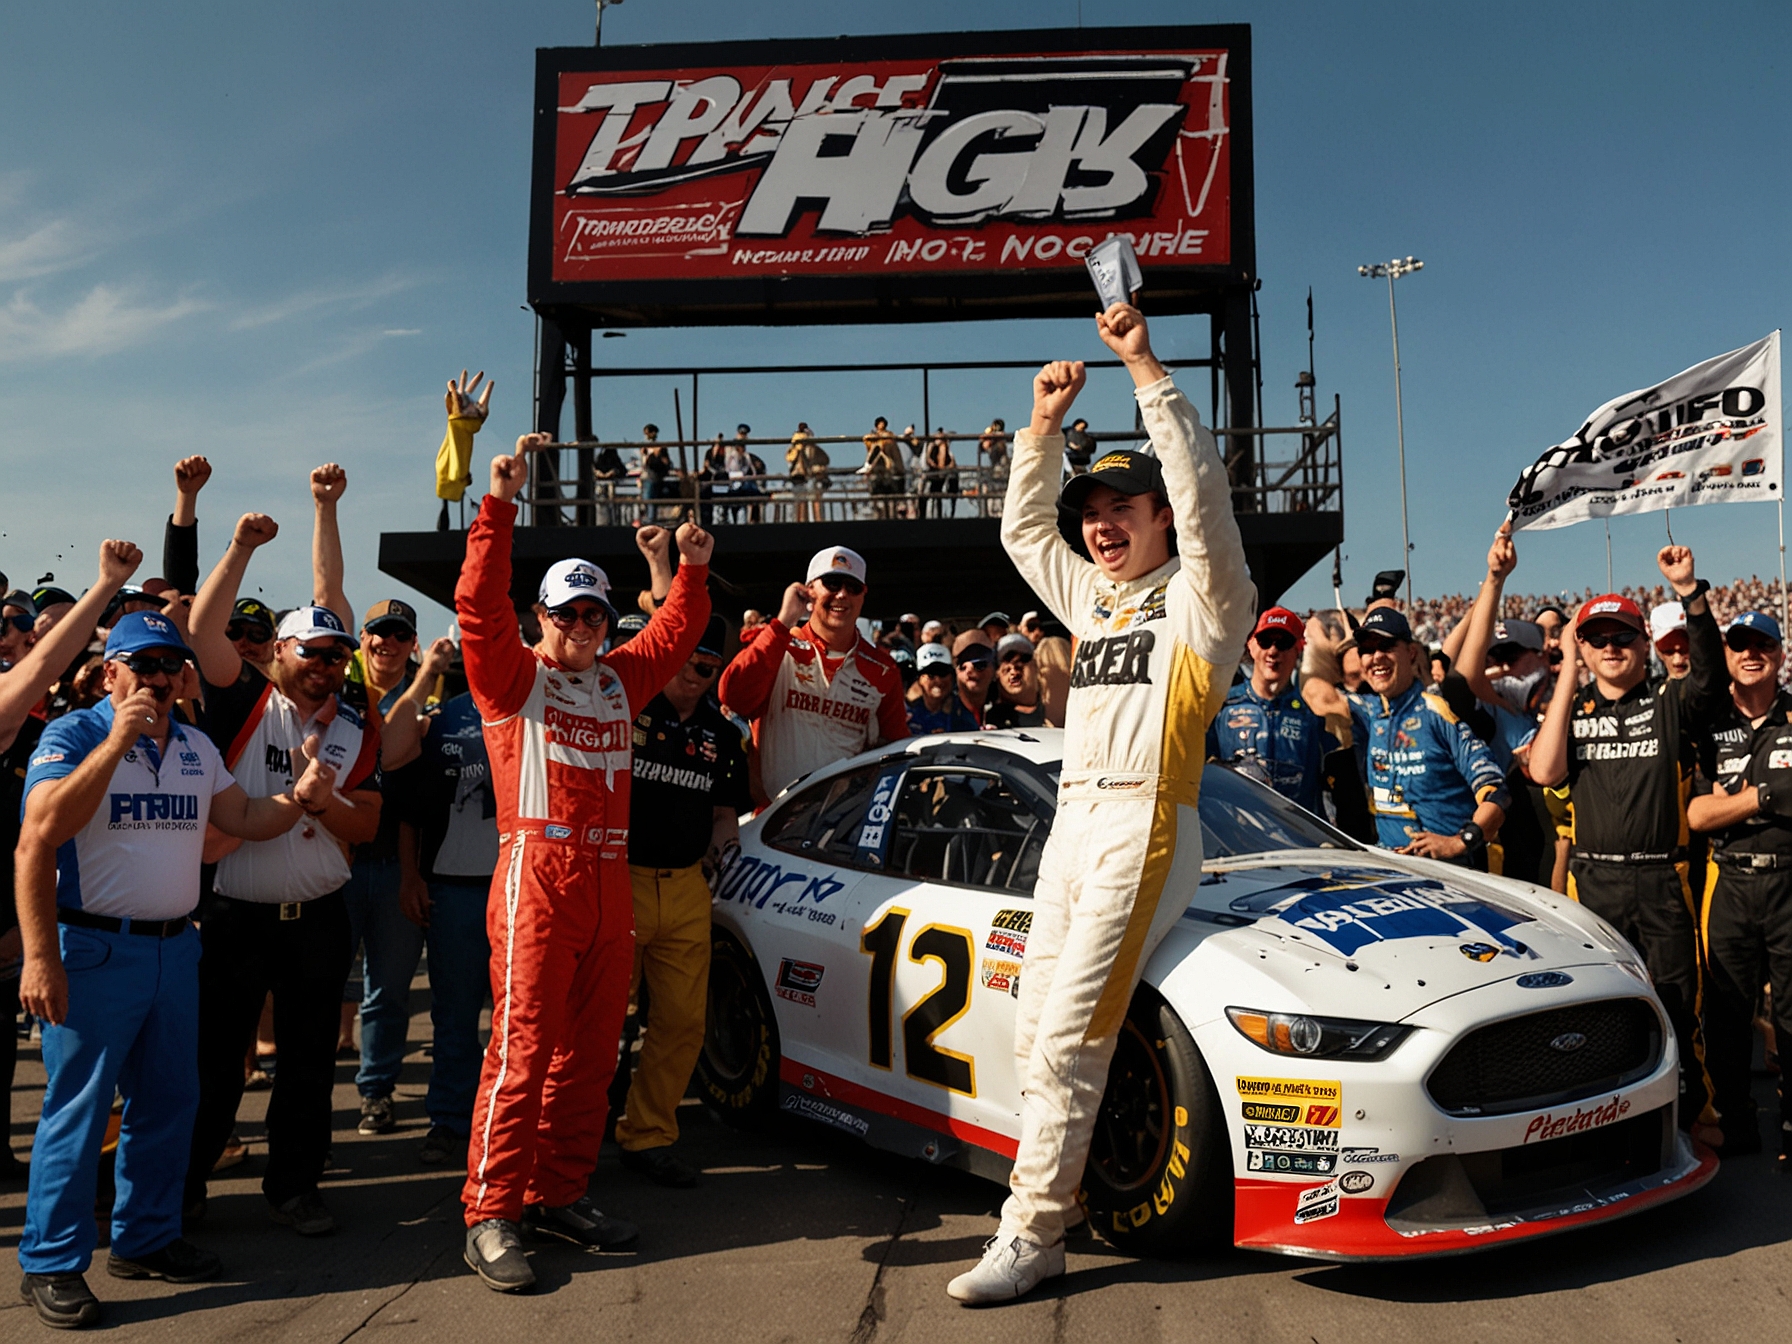 Ryan Blaney celebrating in victory lane with his No. 12 Team Penske Ford at Iowa Speedway, surrounded by his jubilant crew after winning the Iowa Corn 350 and ending his winless streak.